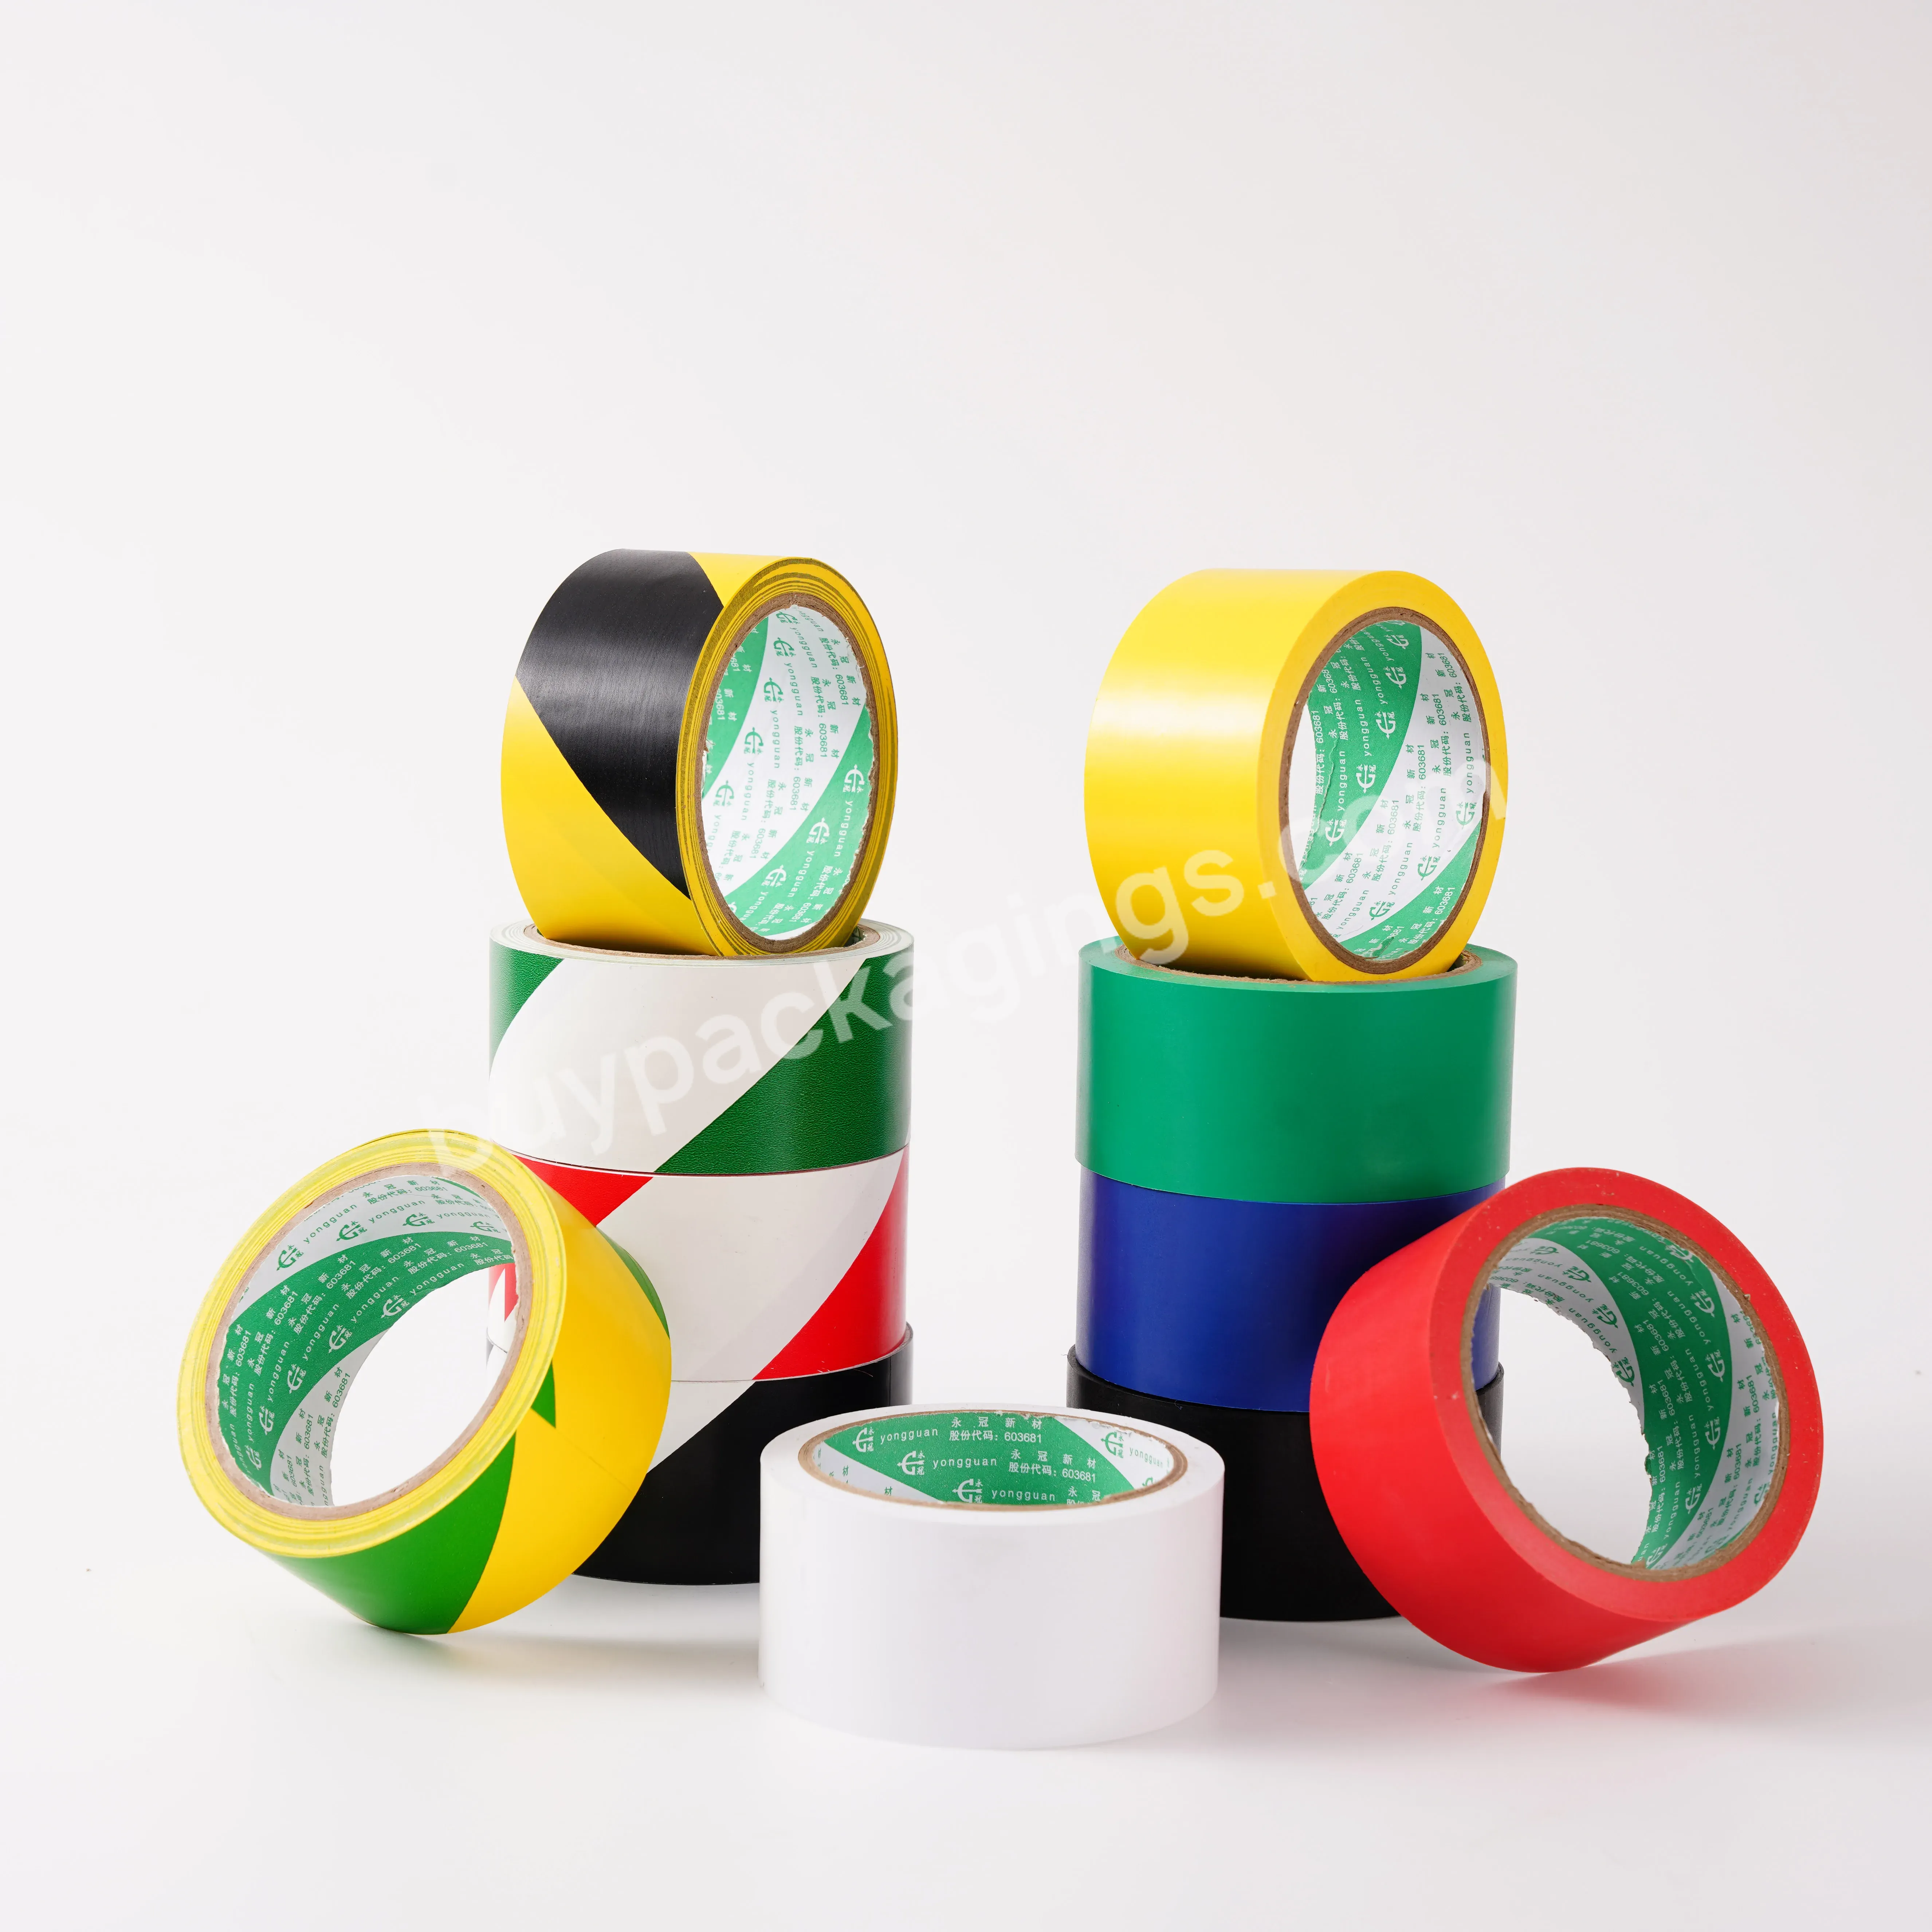 Warning Tape Are Pasted With Waterproof And Wear-resistant Floor Tape Of Workshop